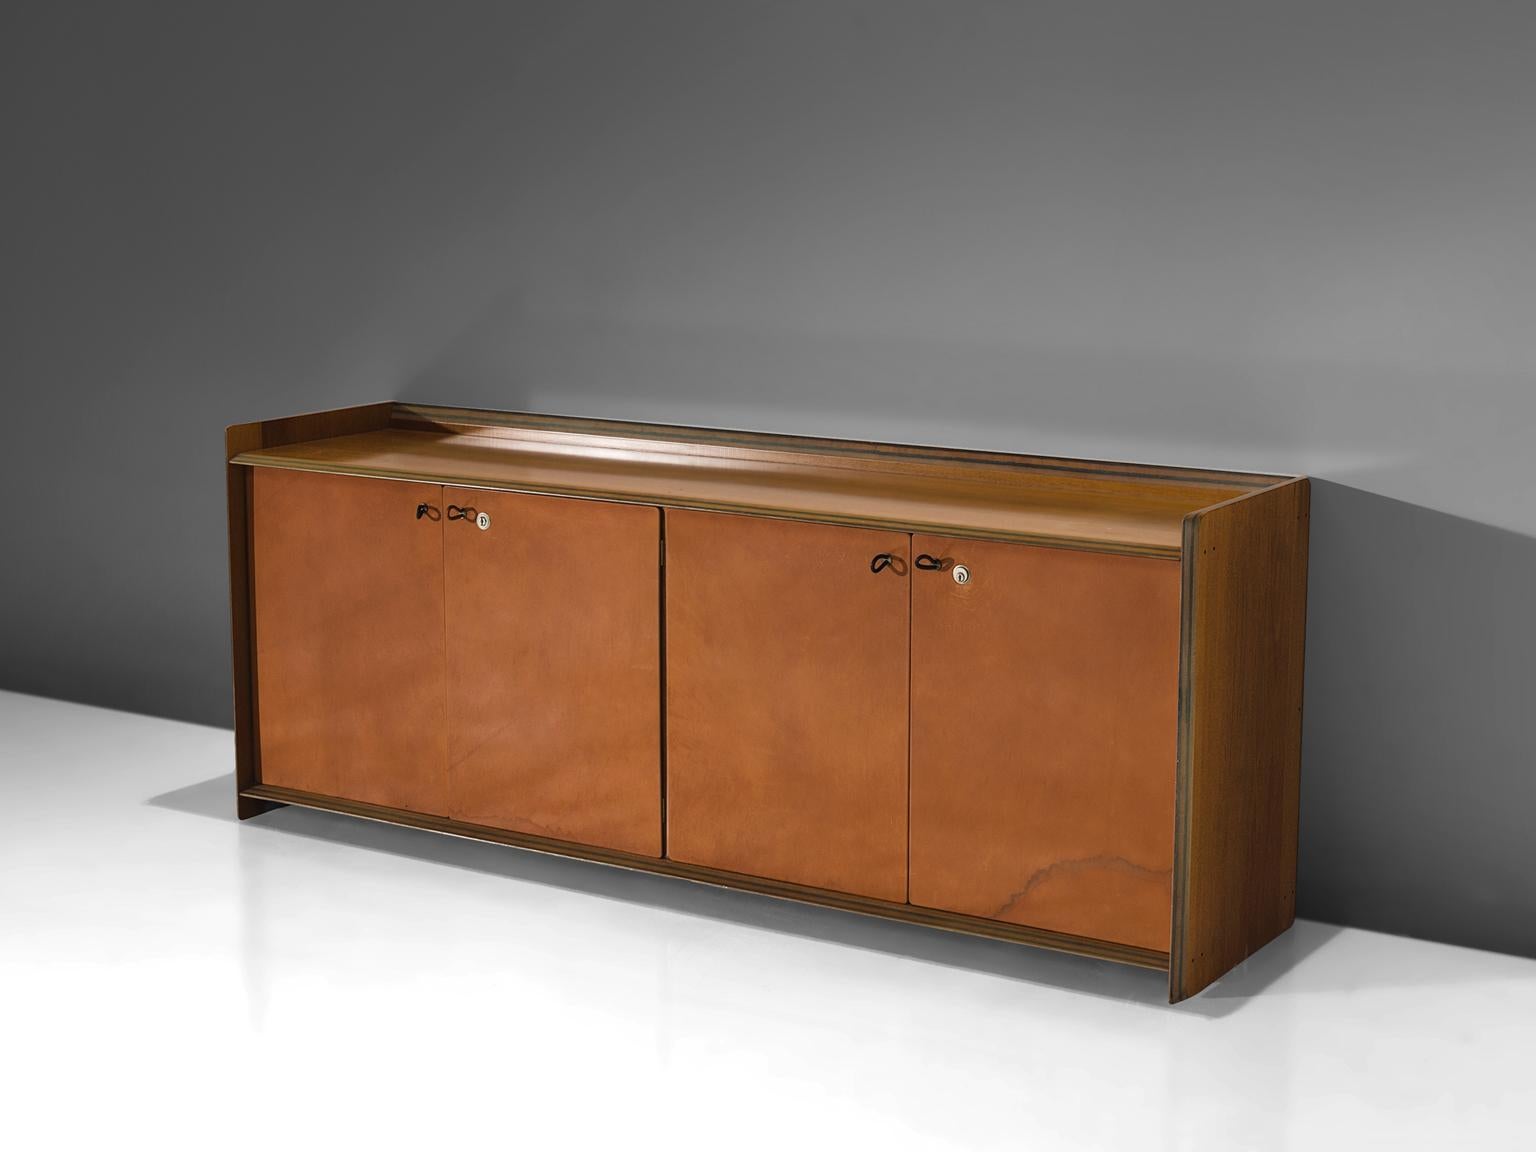 Afra & Tobia Scarpa, Artona cabinet, walnut and four leather doors, Italy, circa 1975

This sideboard with leather front is designed as part of the Artona line by The Artona line by the Scarpa duo was in fact the first line ever produced by Maxalto,